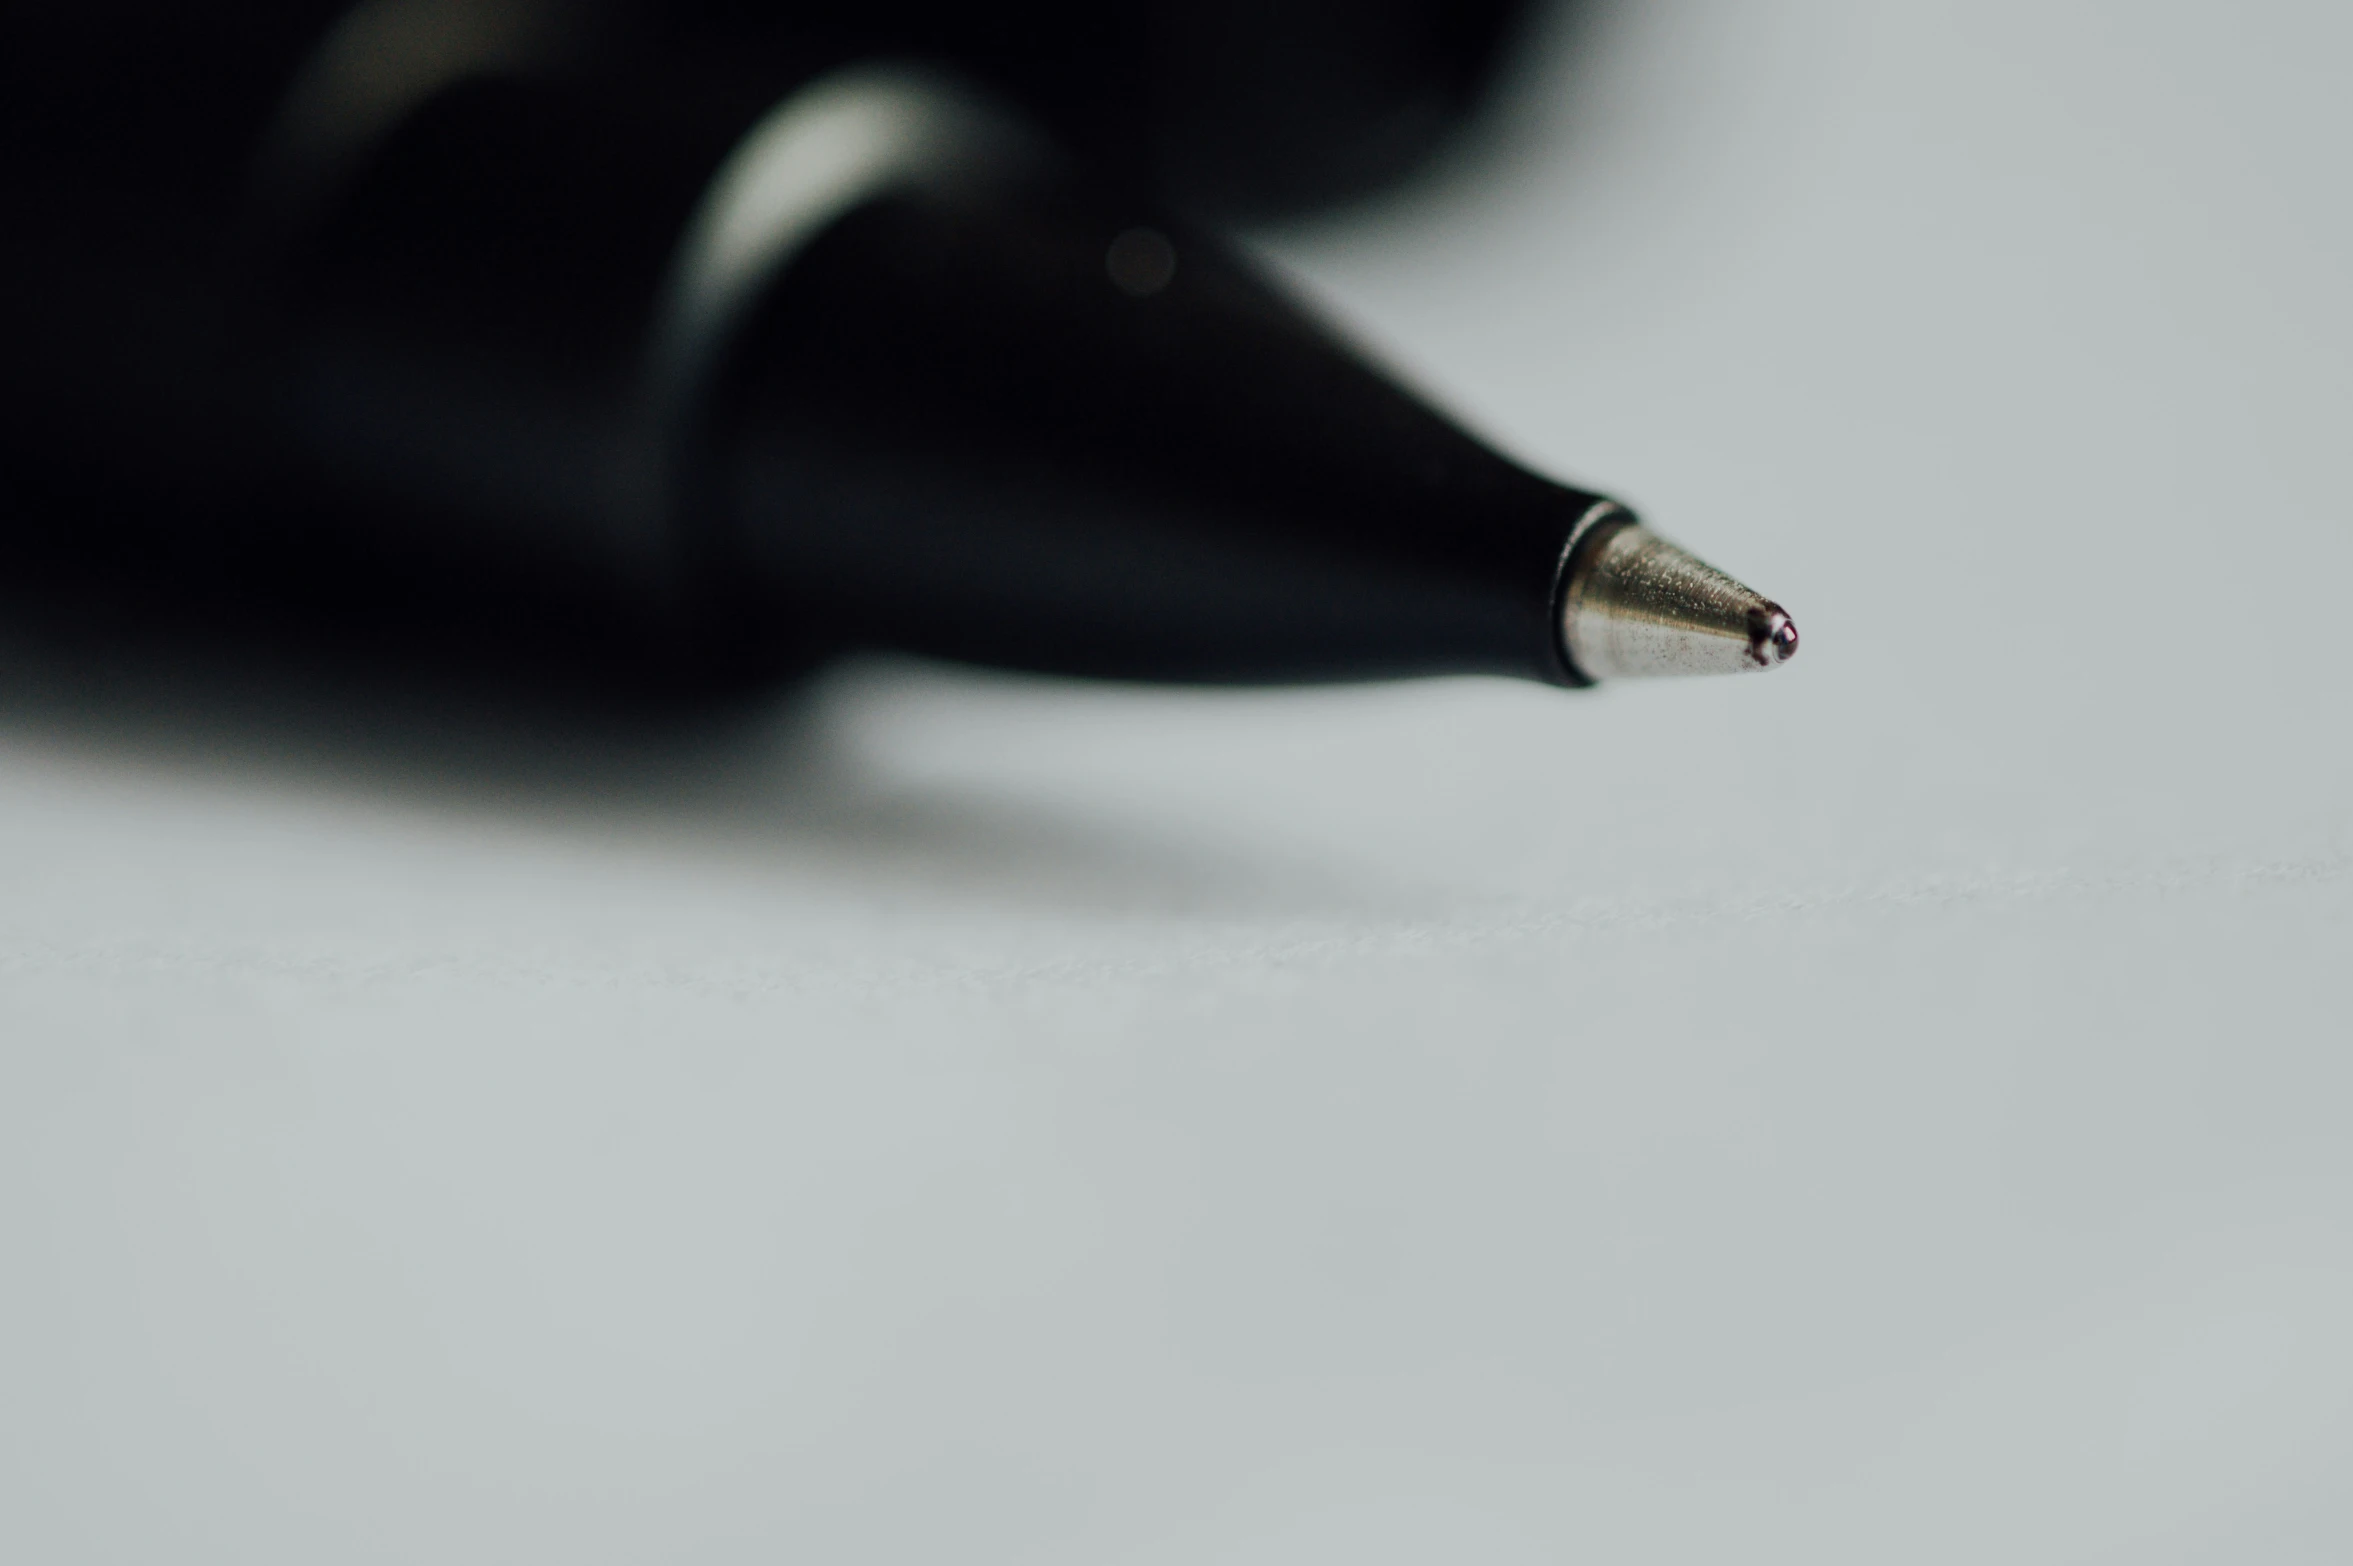 an eyeliner tip of a pen on a white table